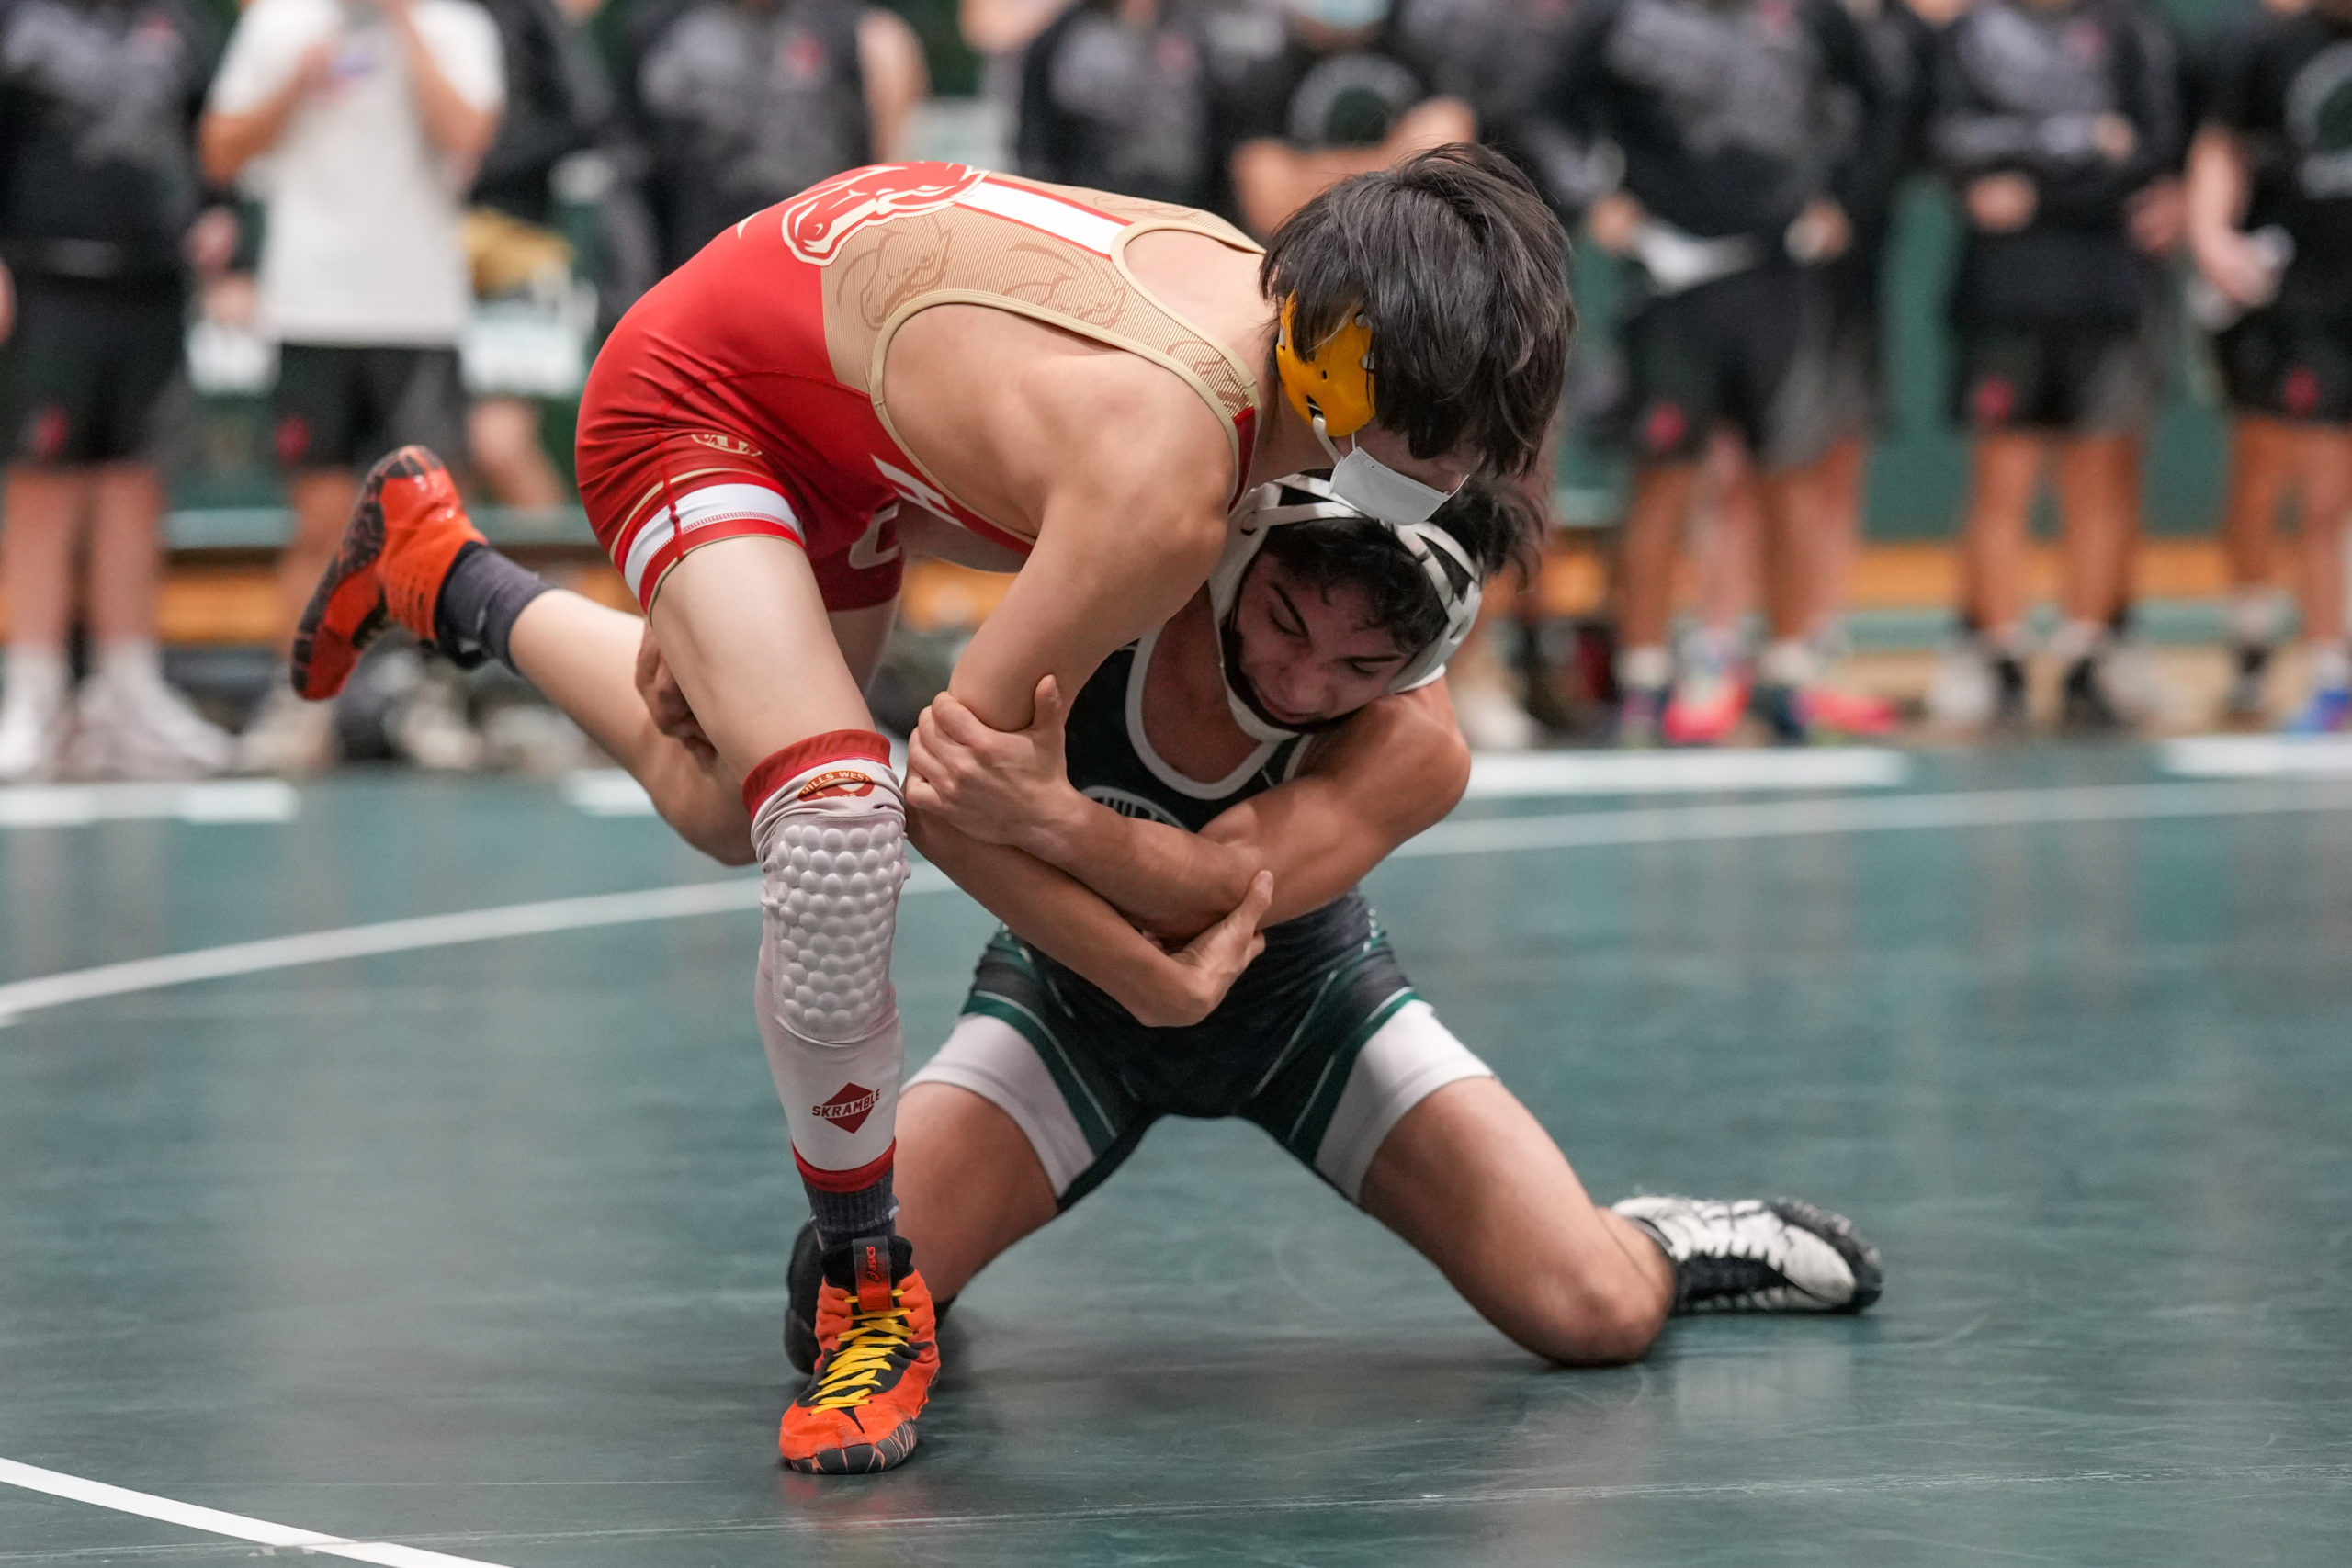 Randy Cabrera of Westhampton Beach works on Donghyun Lee of Hills West, whom he beat, 6-2.